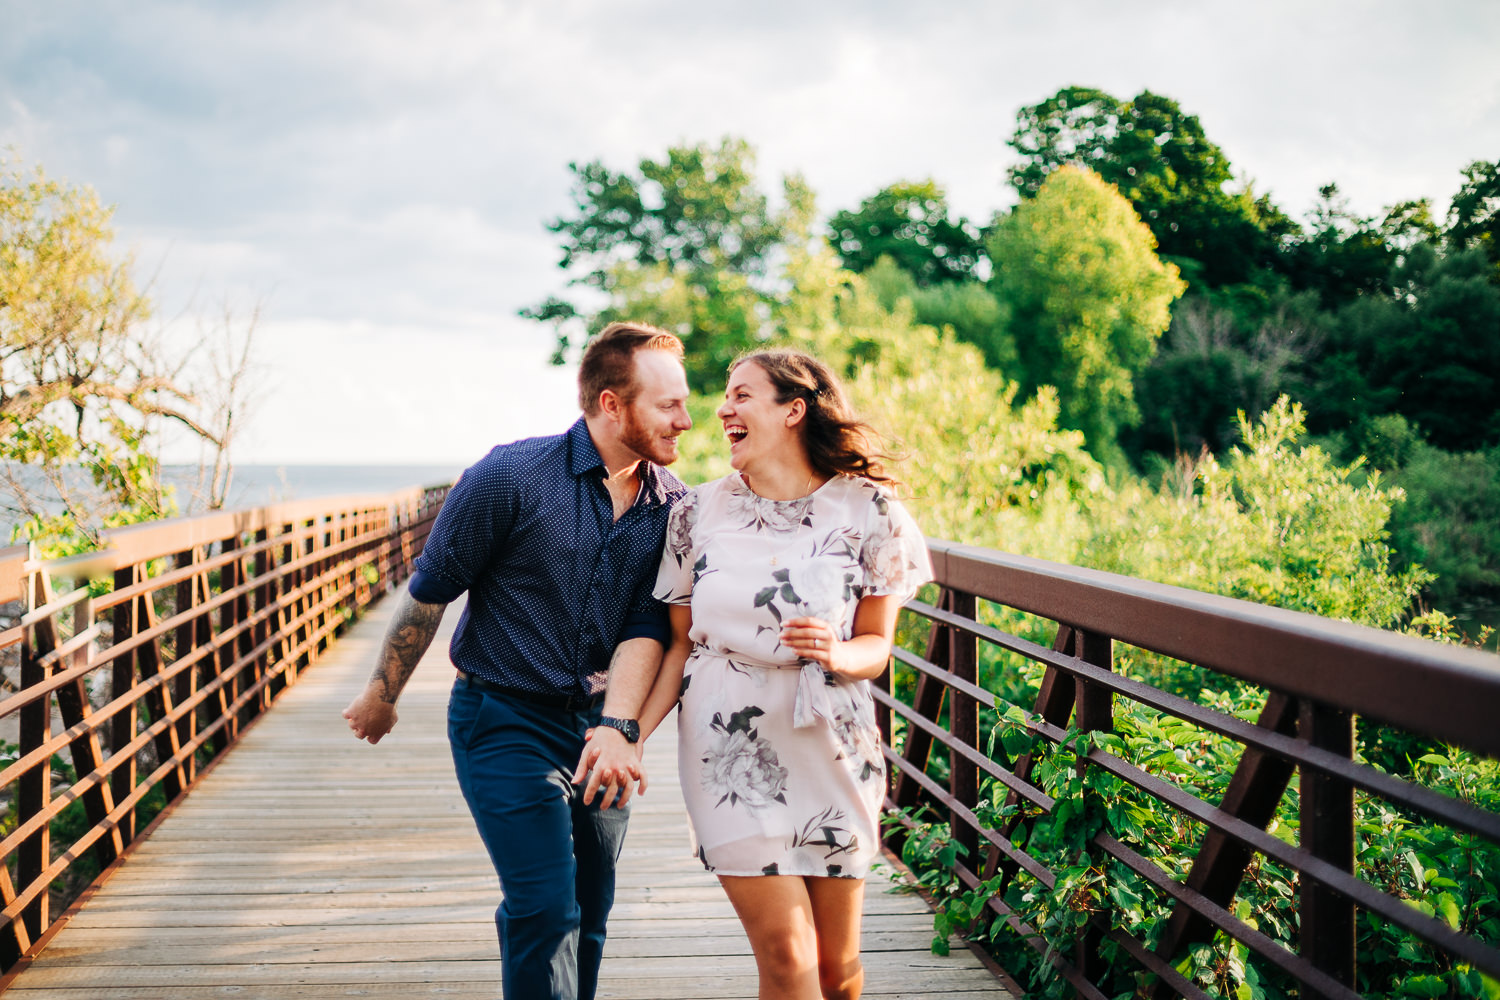 Playful couple laughing while prancing along a boardwalk